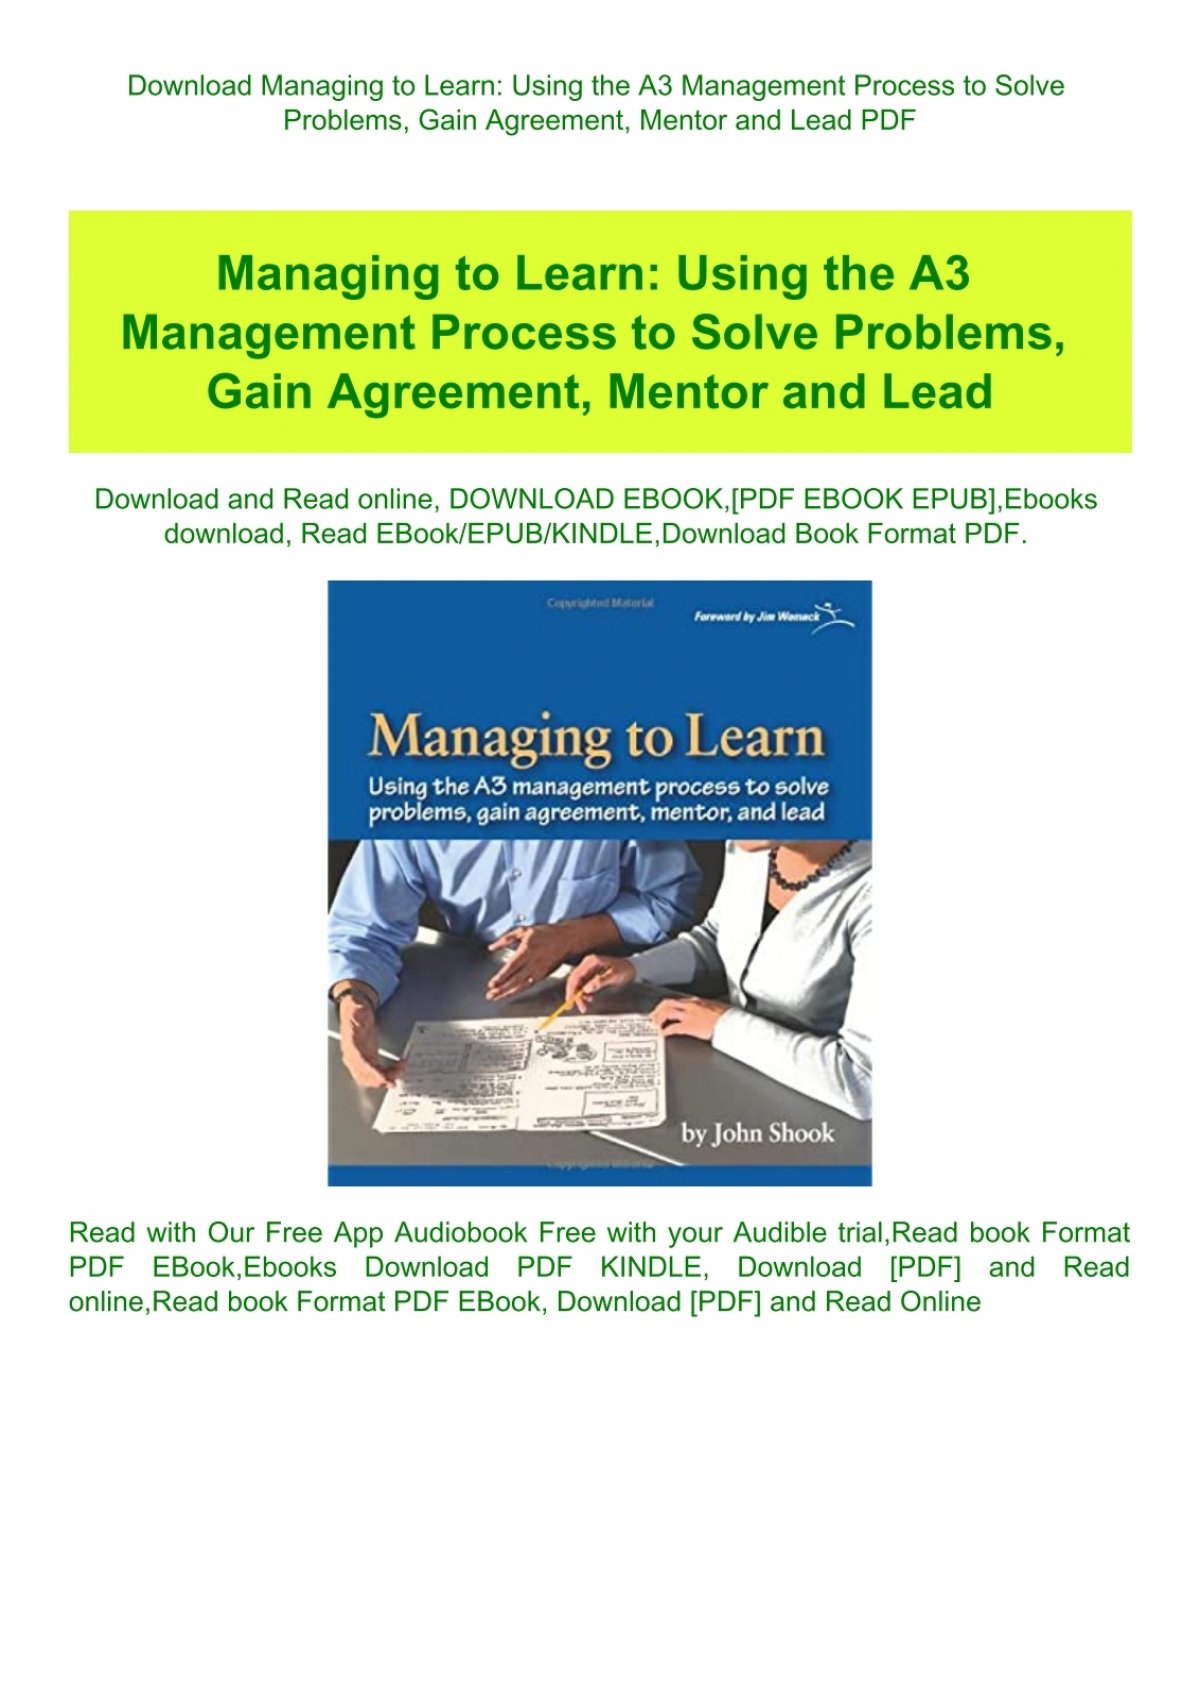 Download Managing to Learn Using the A3 Management Process to Solve